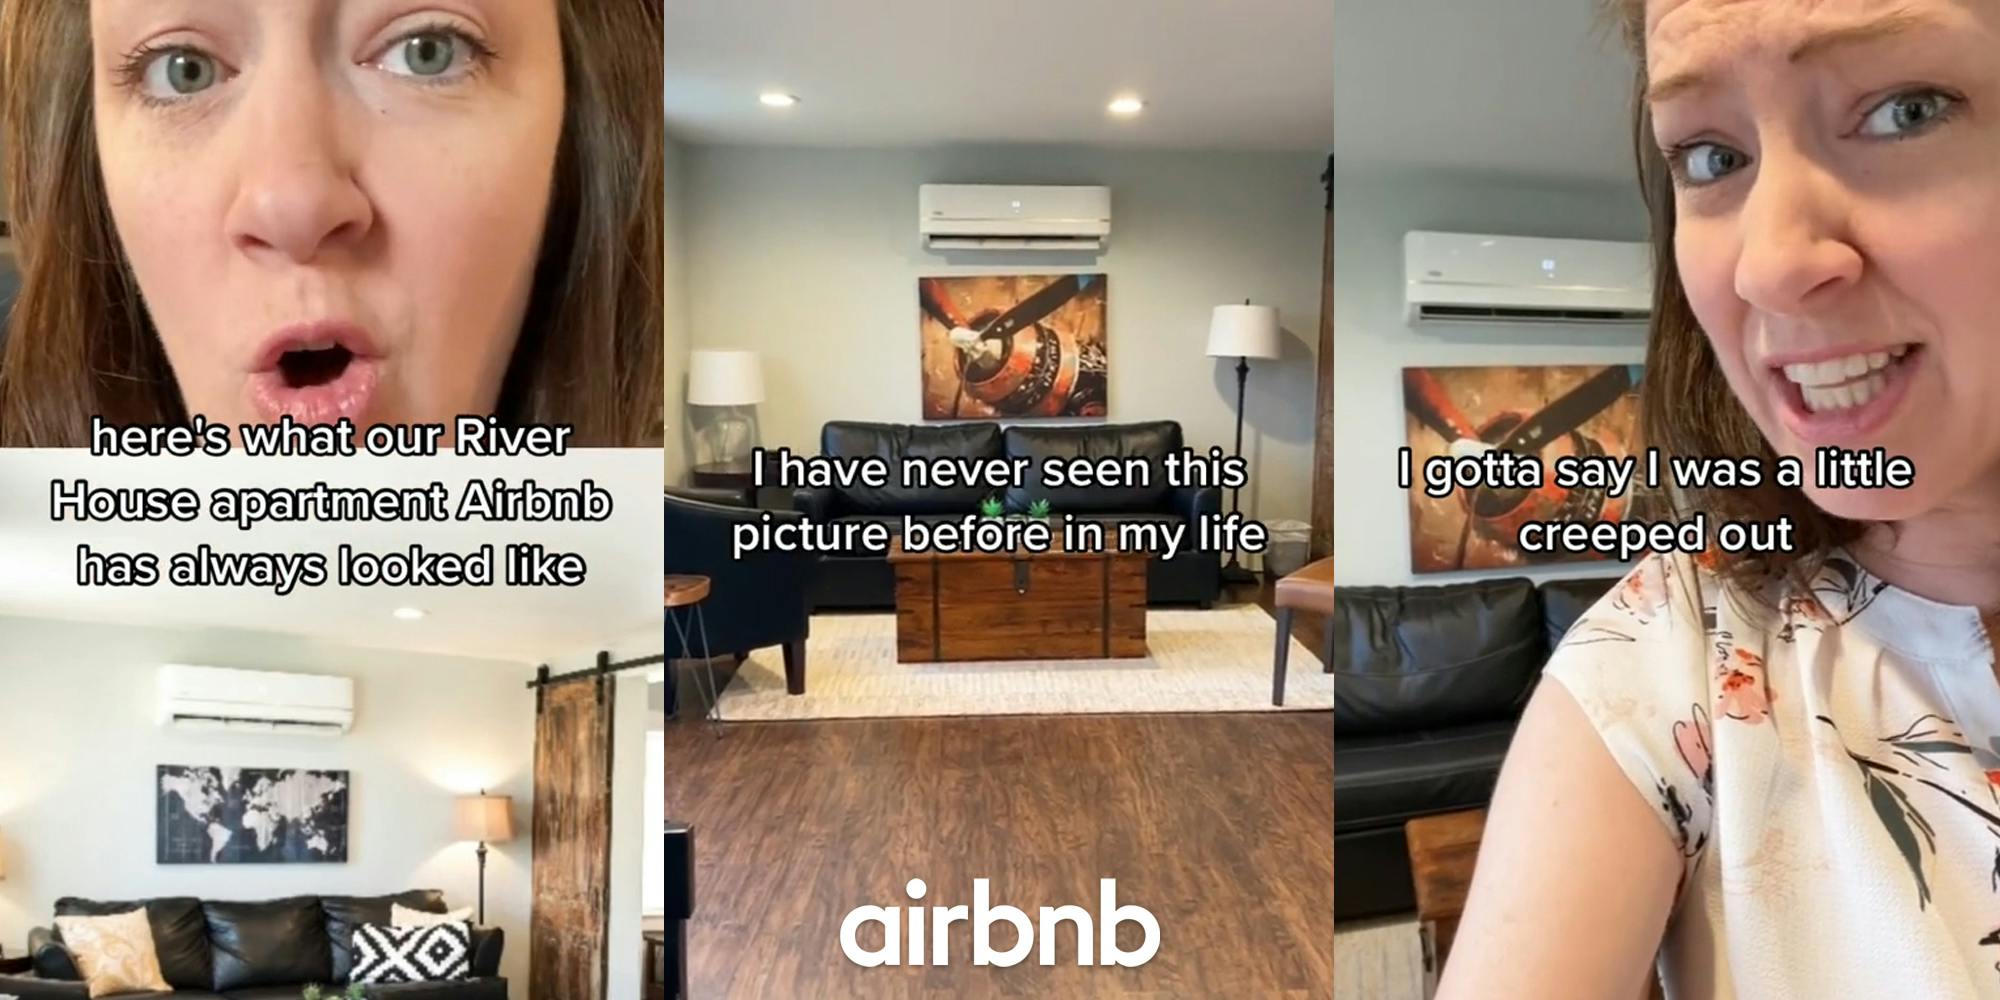 Airbnb host speaking with image of painting on wall with caption "here's what our River House apartment Airbnb has always looked like" (l) room with different painting on wall with caption "I have never seen this picture before in my life" with Airbnb logo at bottom c) Airbnb host speaking with caption "I gotta say I was a little creeped out" (r)